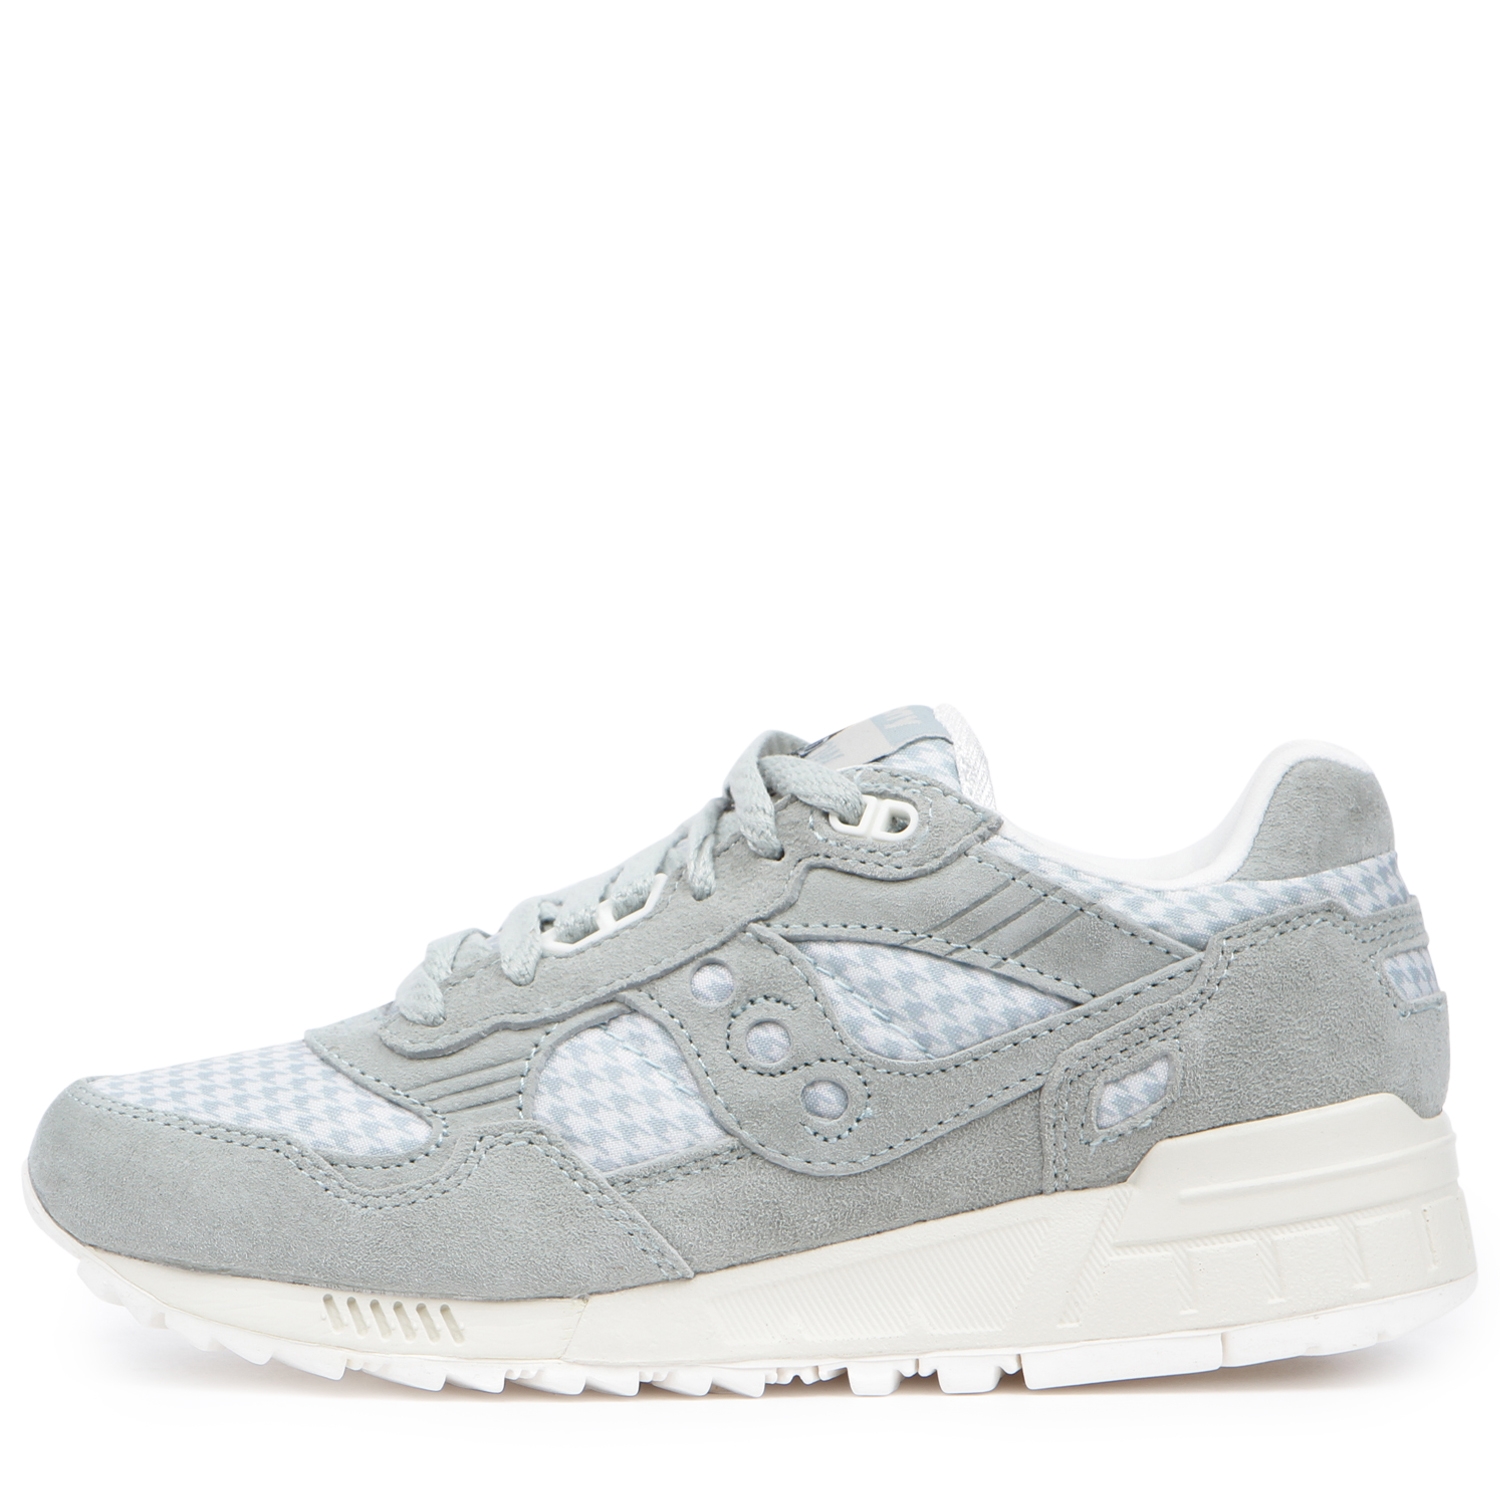 saucony shadow 5000 houndstooth